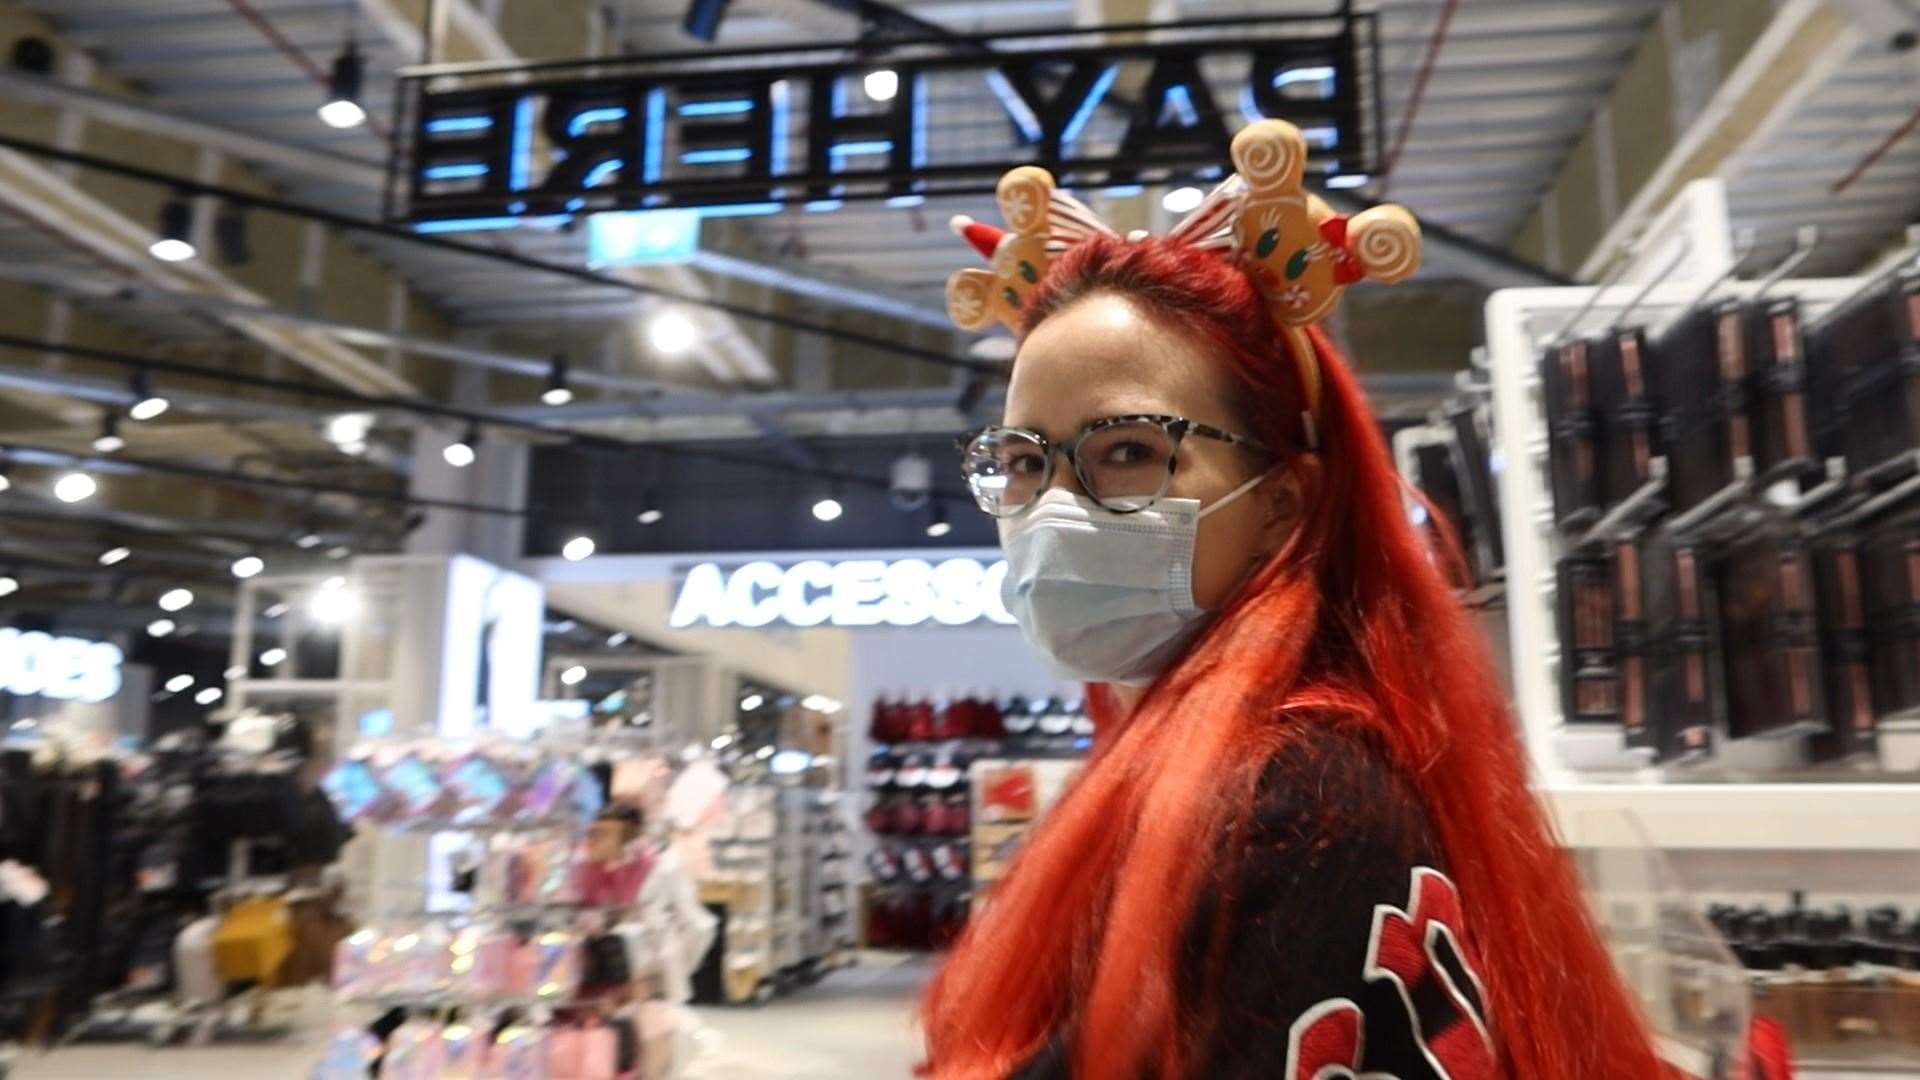 Emma Valls-Russell vlogged about the Primark shopping experience for her YouTube channel DisneyEmUK